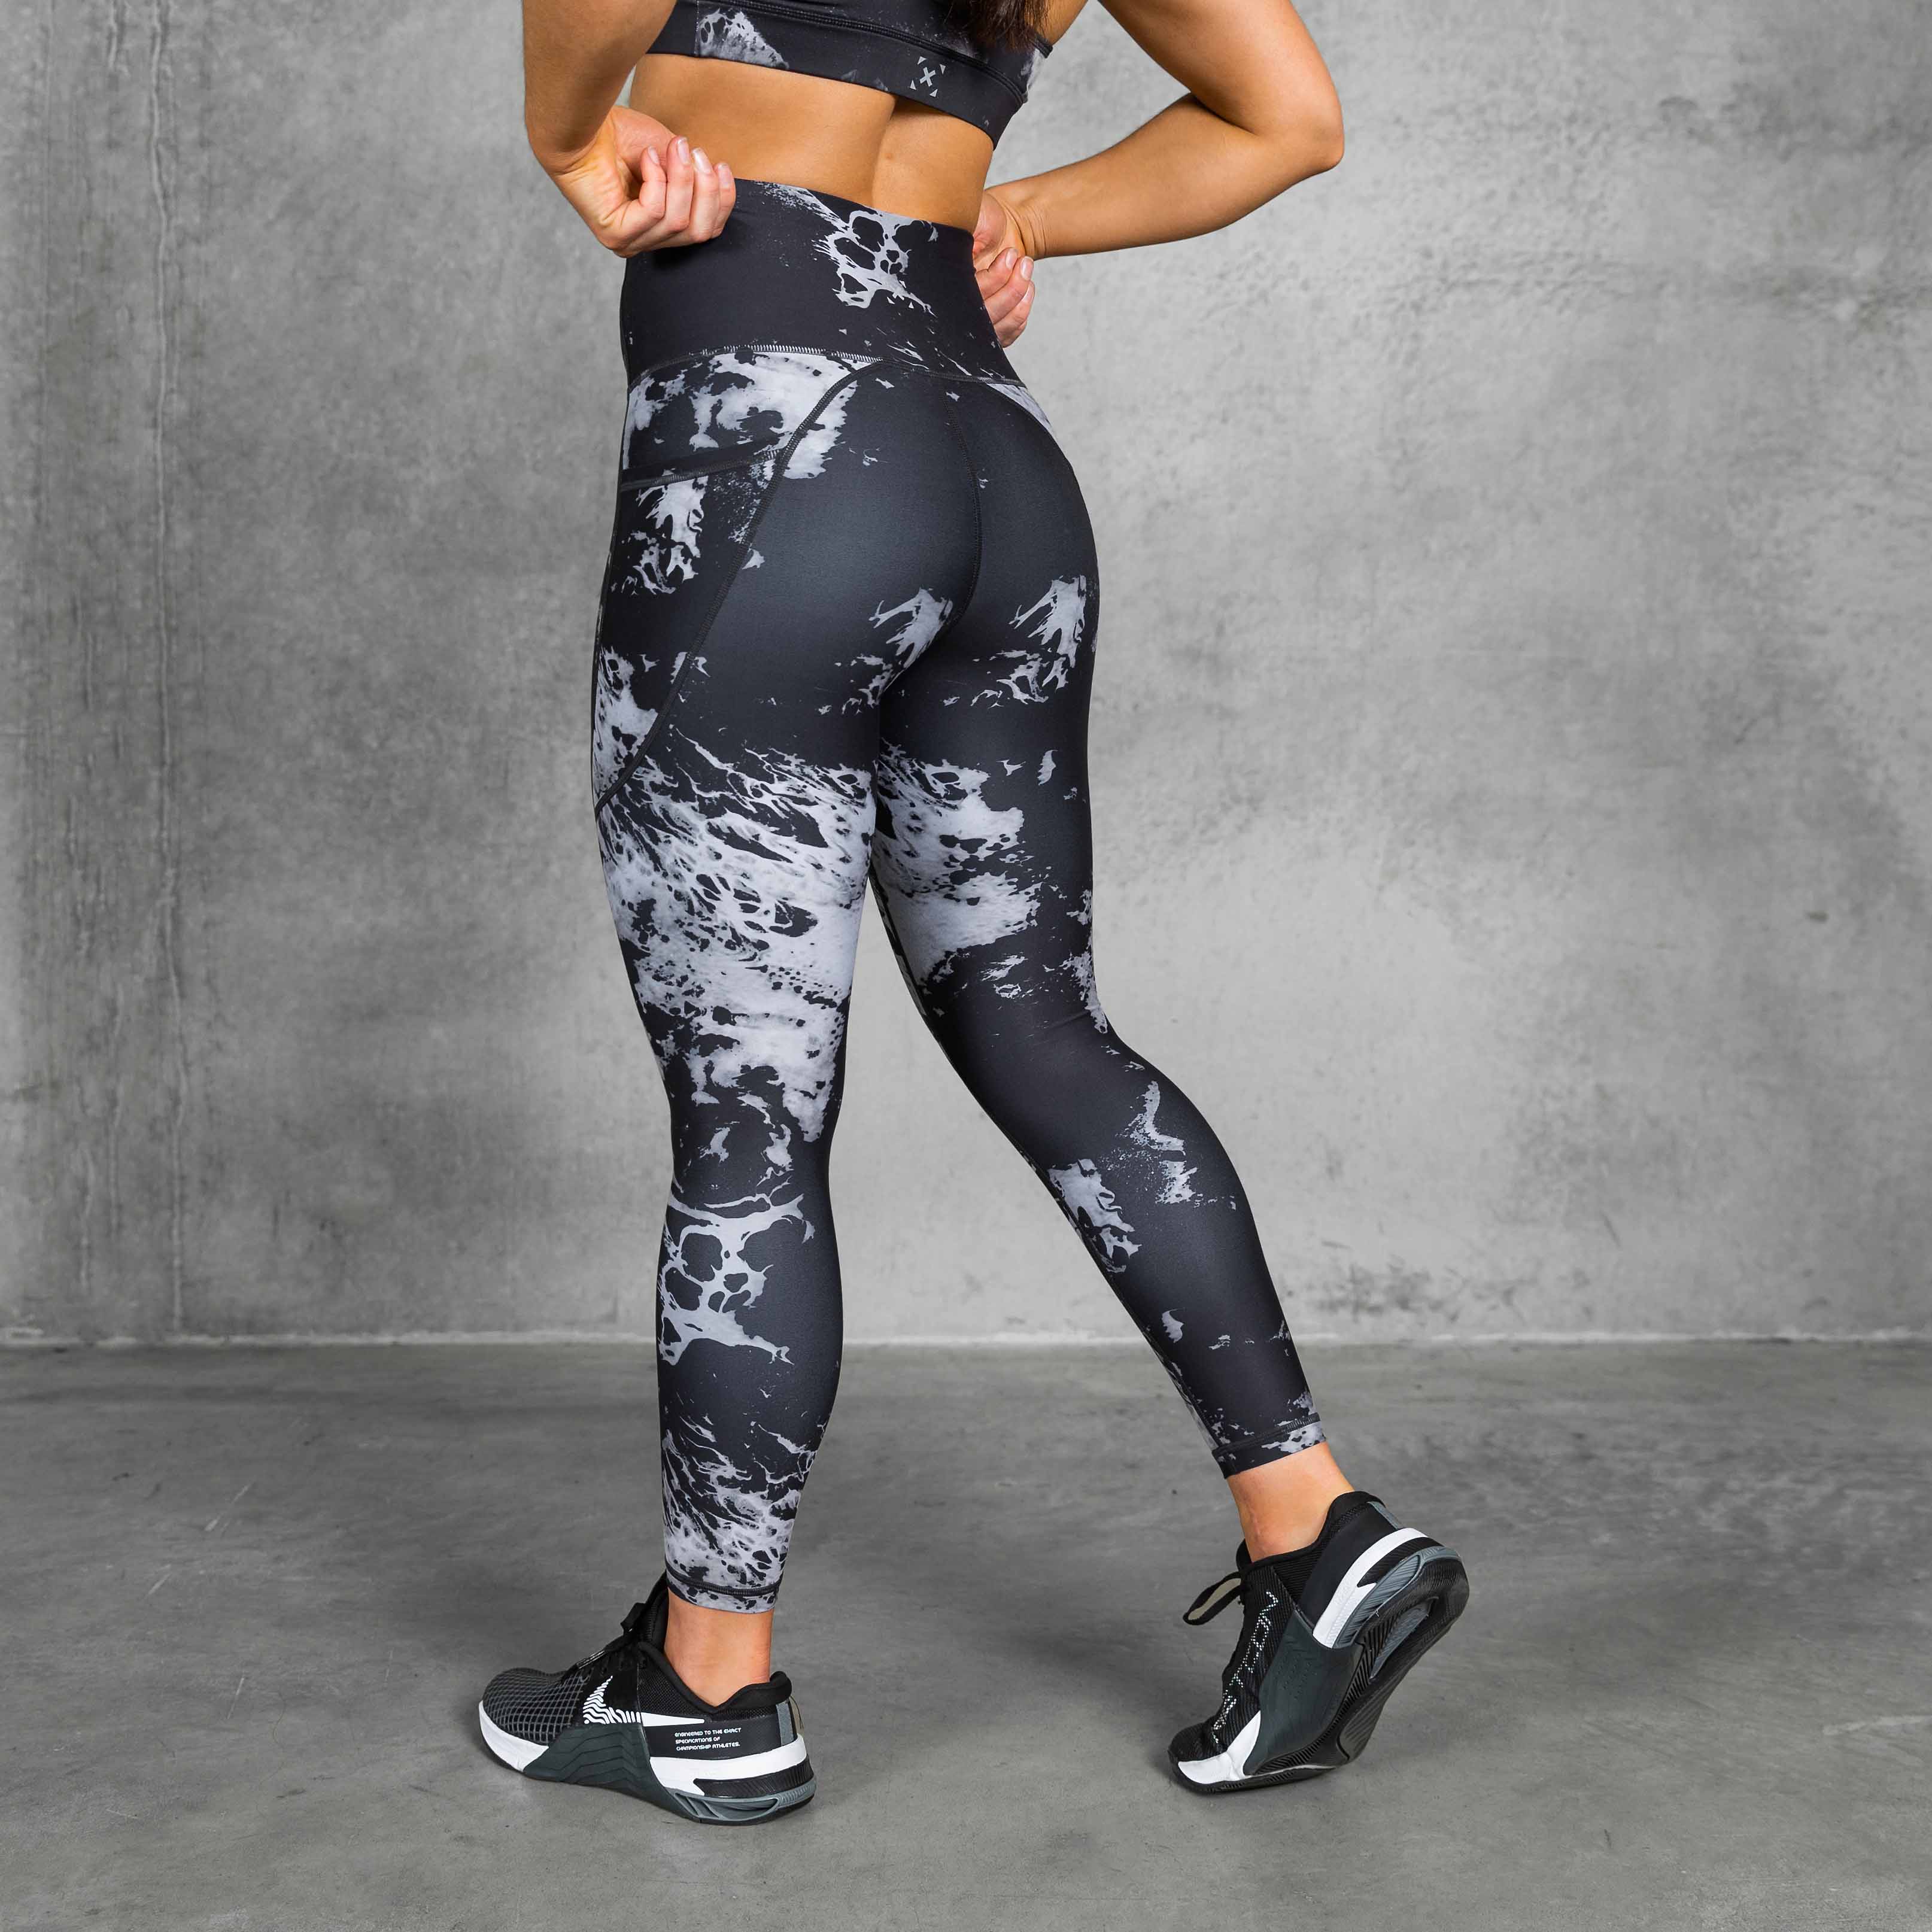 TWL - WOMEN'S ENERGY HIGH WAISTED 7/8TH TIGHTS - ZEPHYR – The WOD Life